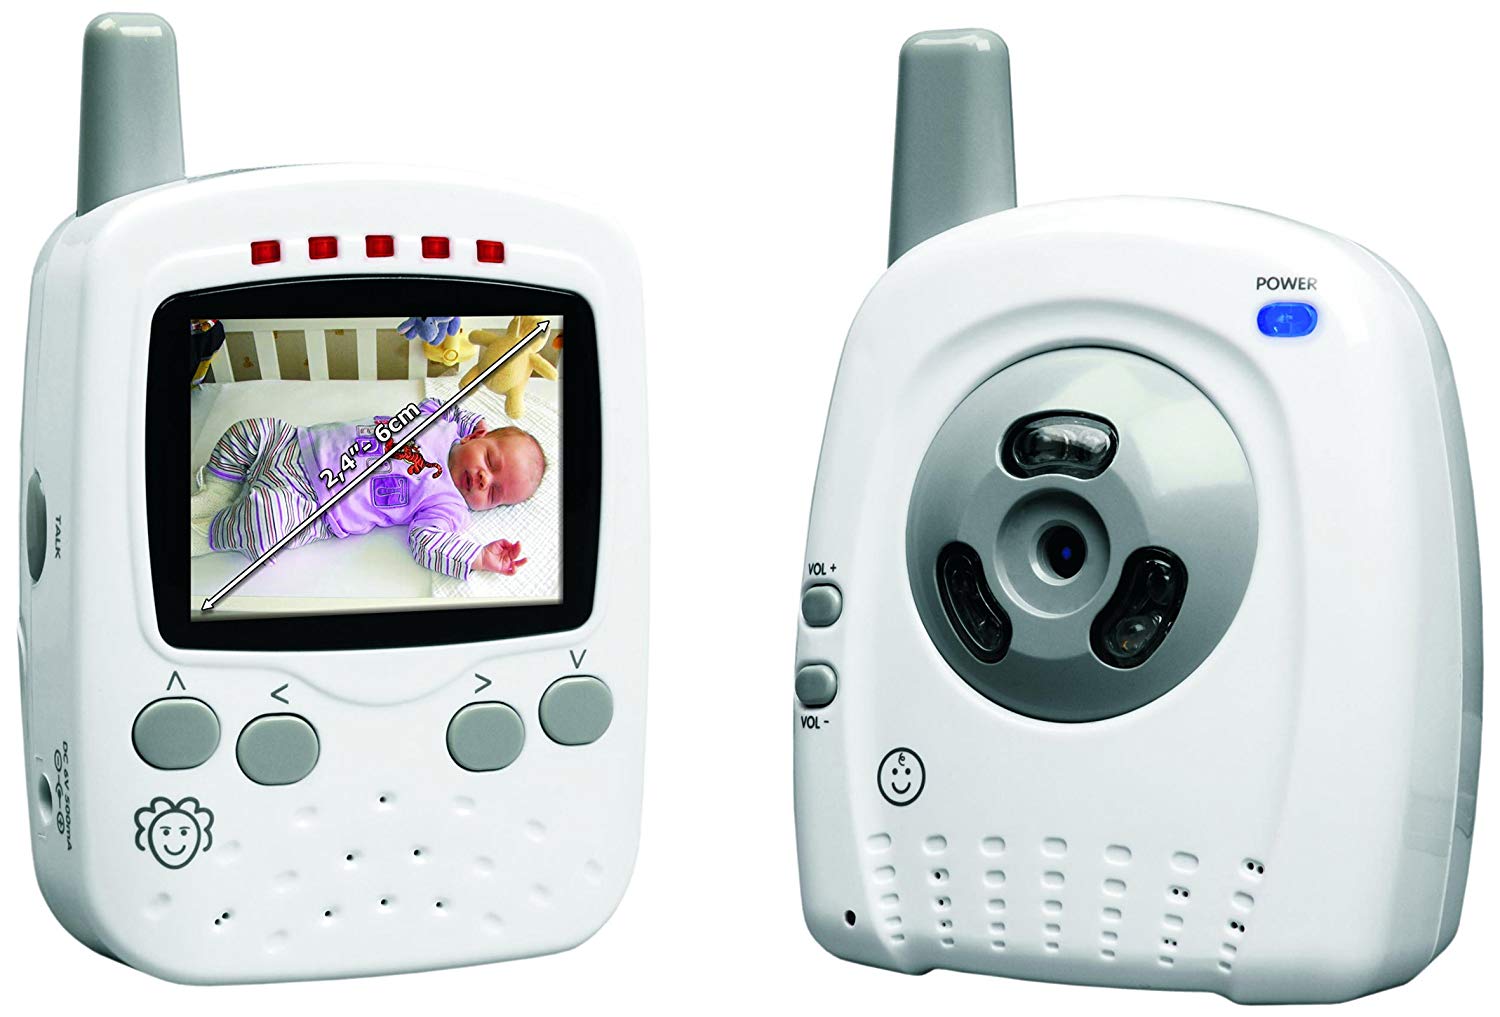 Elro IB200 Digital Baby Monitor with Colour Display